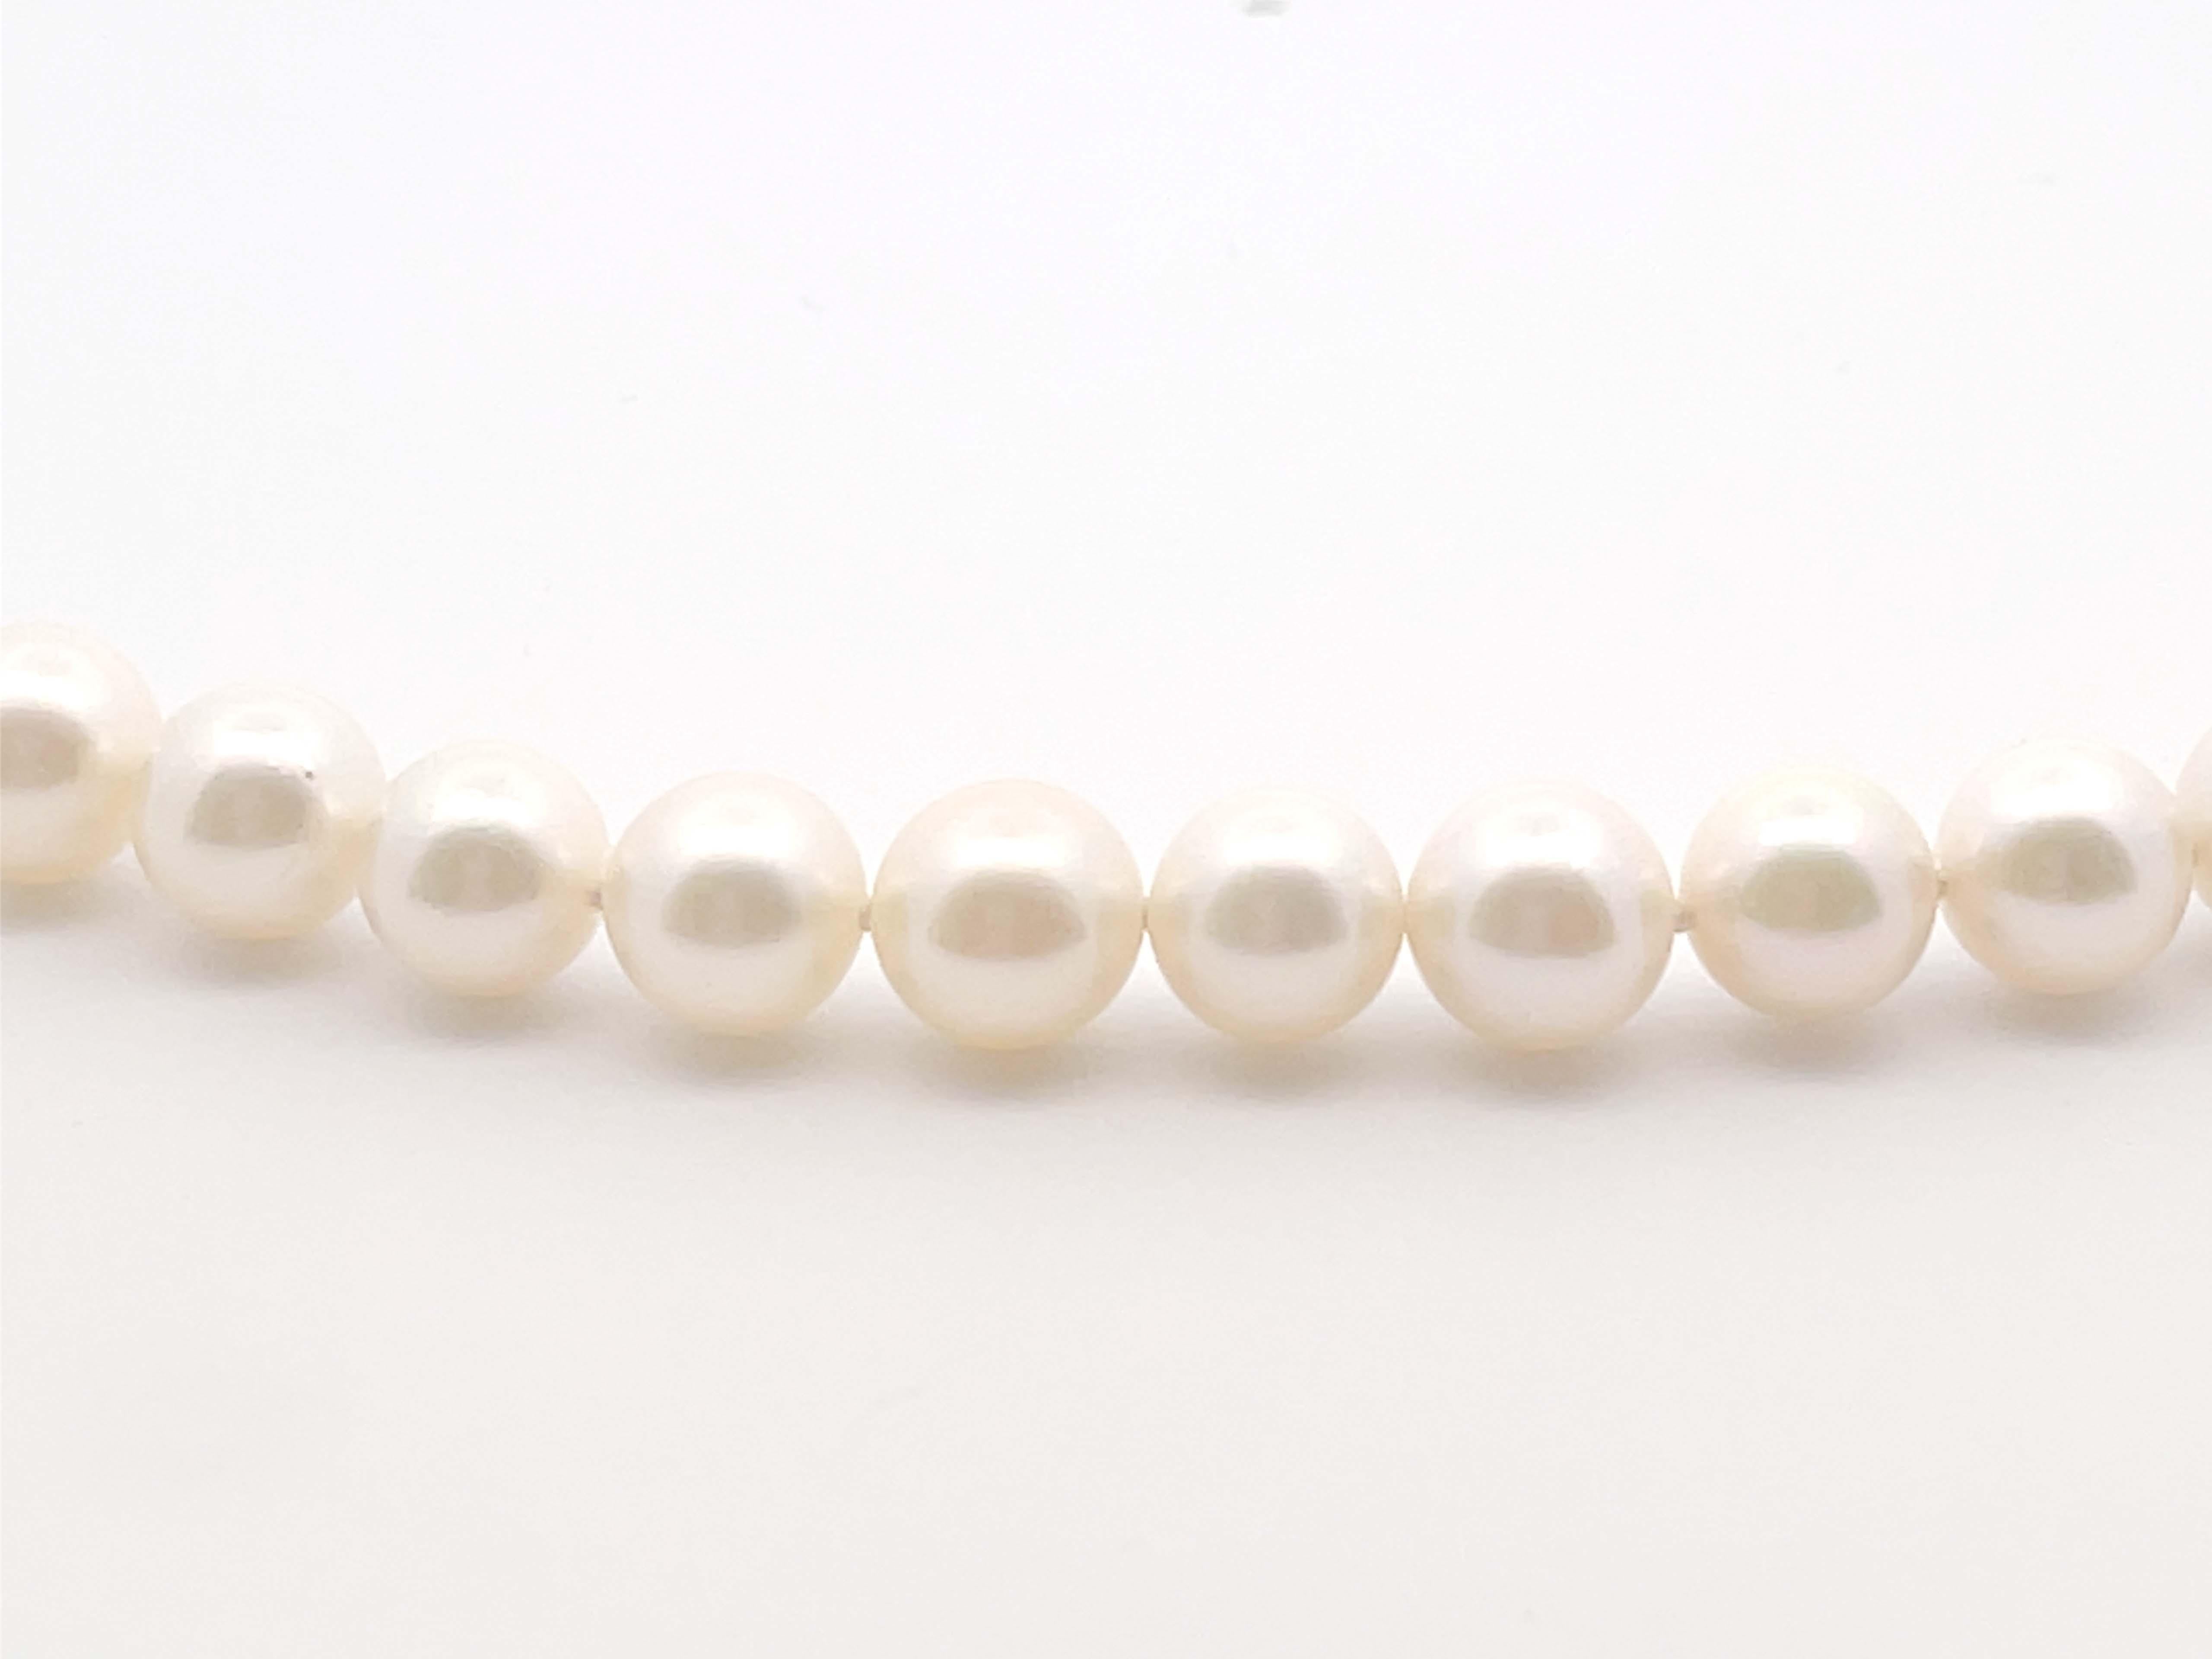 Mikimoto Akoya Cultured Pearl Strand Necklace 18K In Excellent Condition For Sale In Honolulu, HI